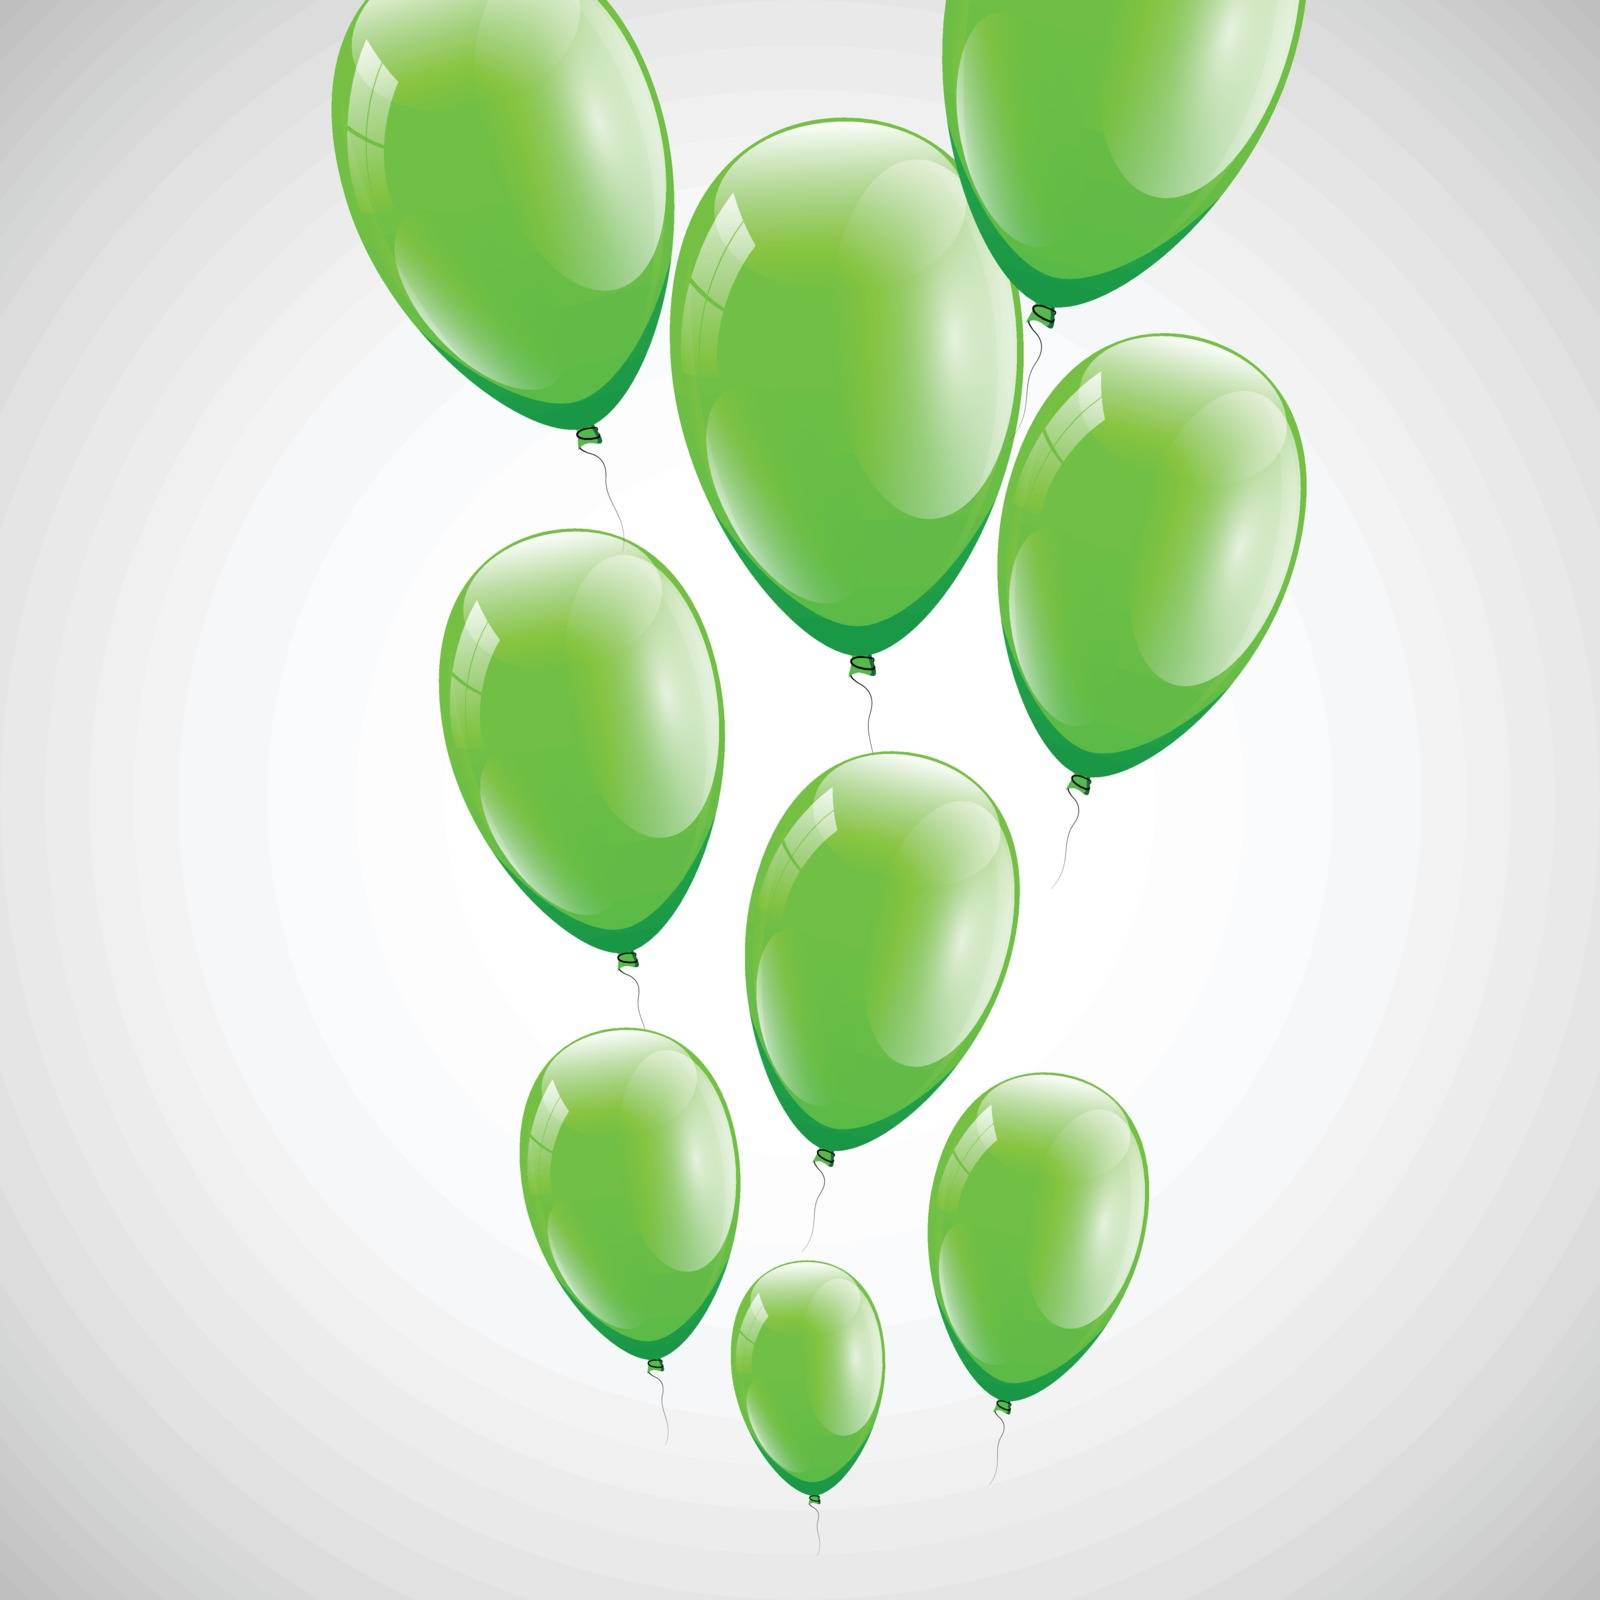 Green balloons with white background, stock vector